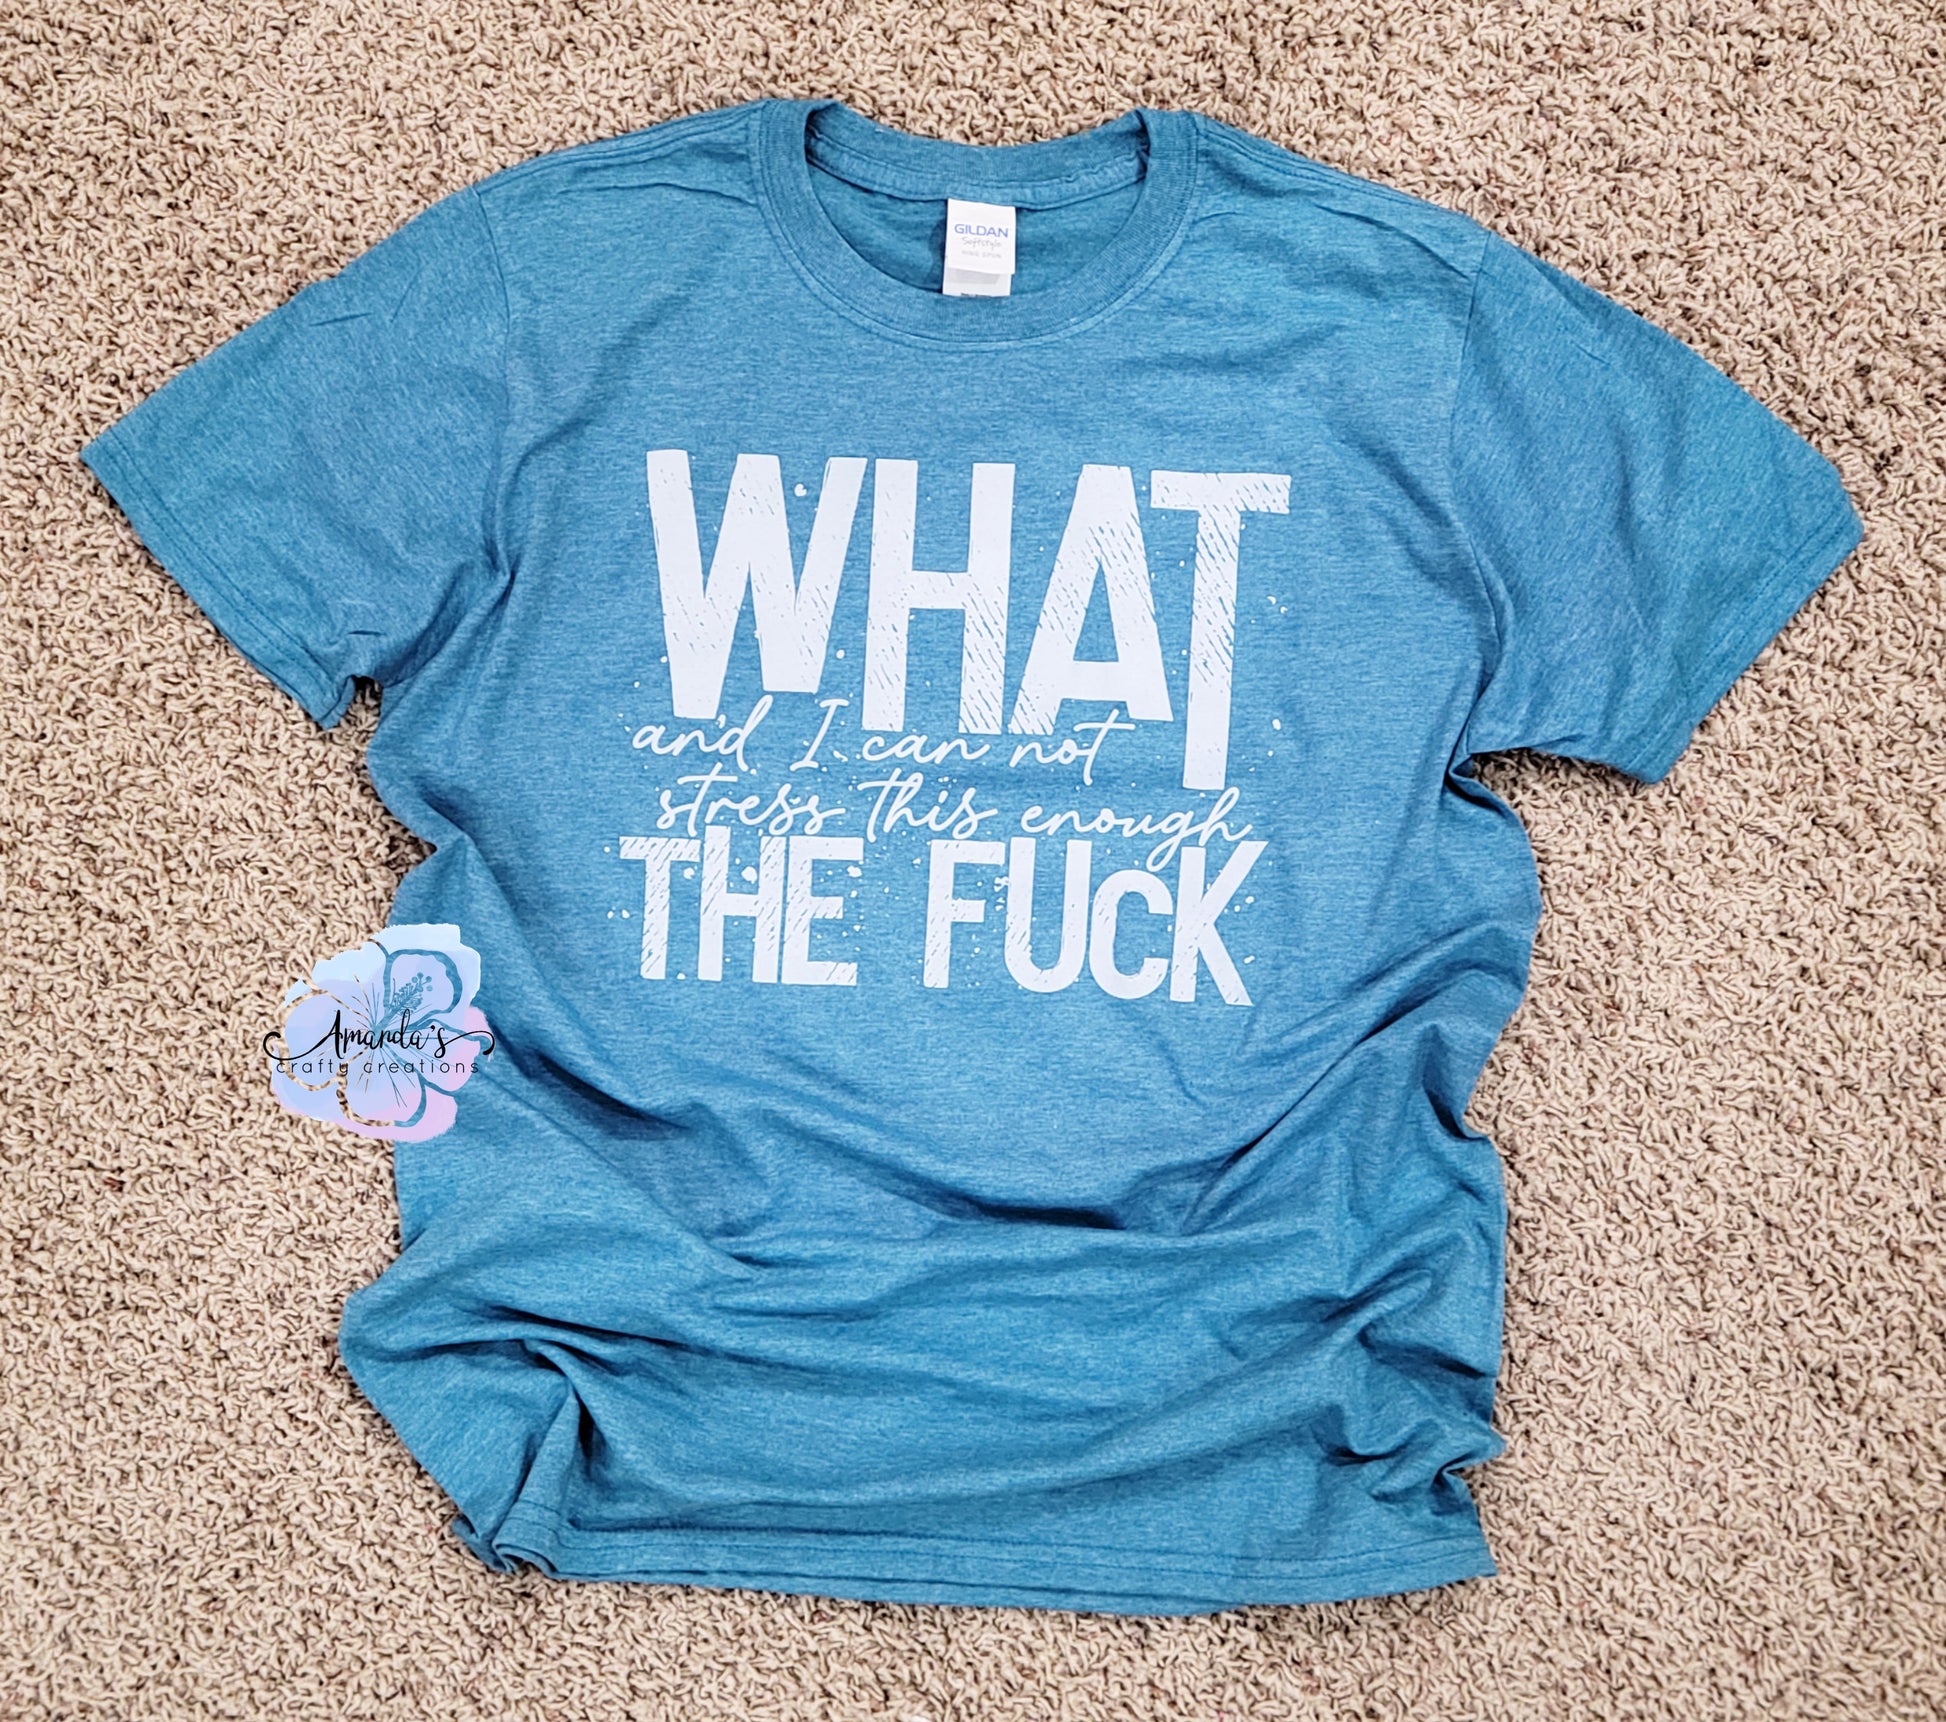 What, and I can not stress this enough, the fuck shirt